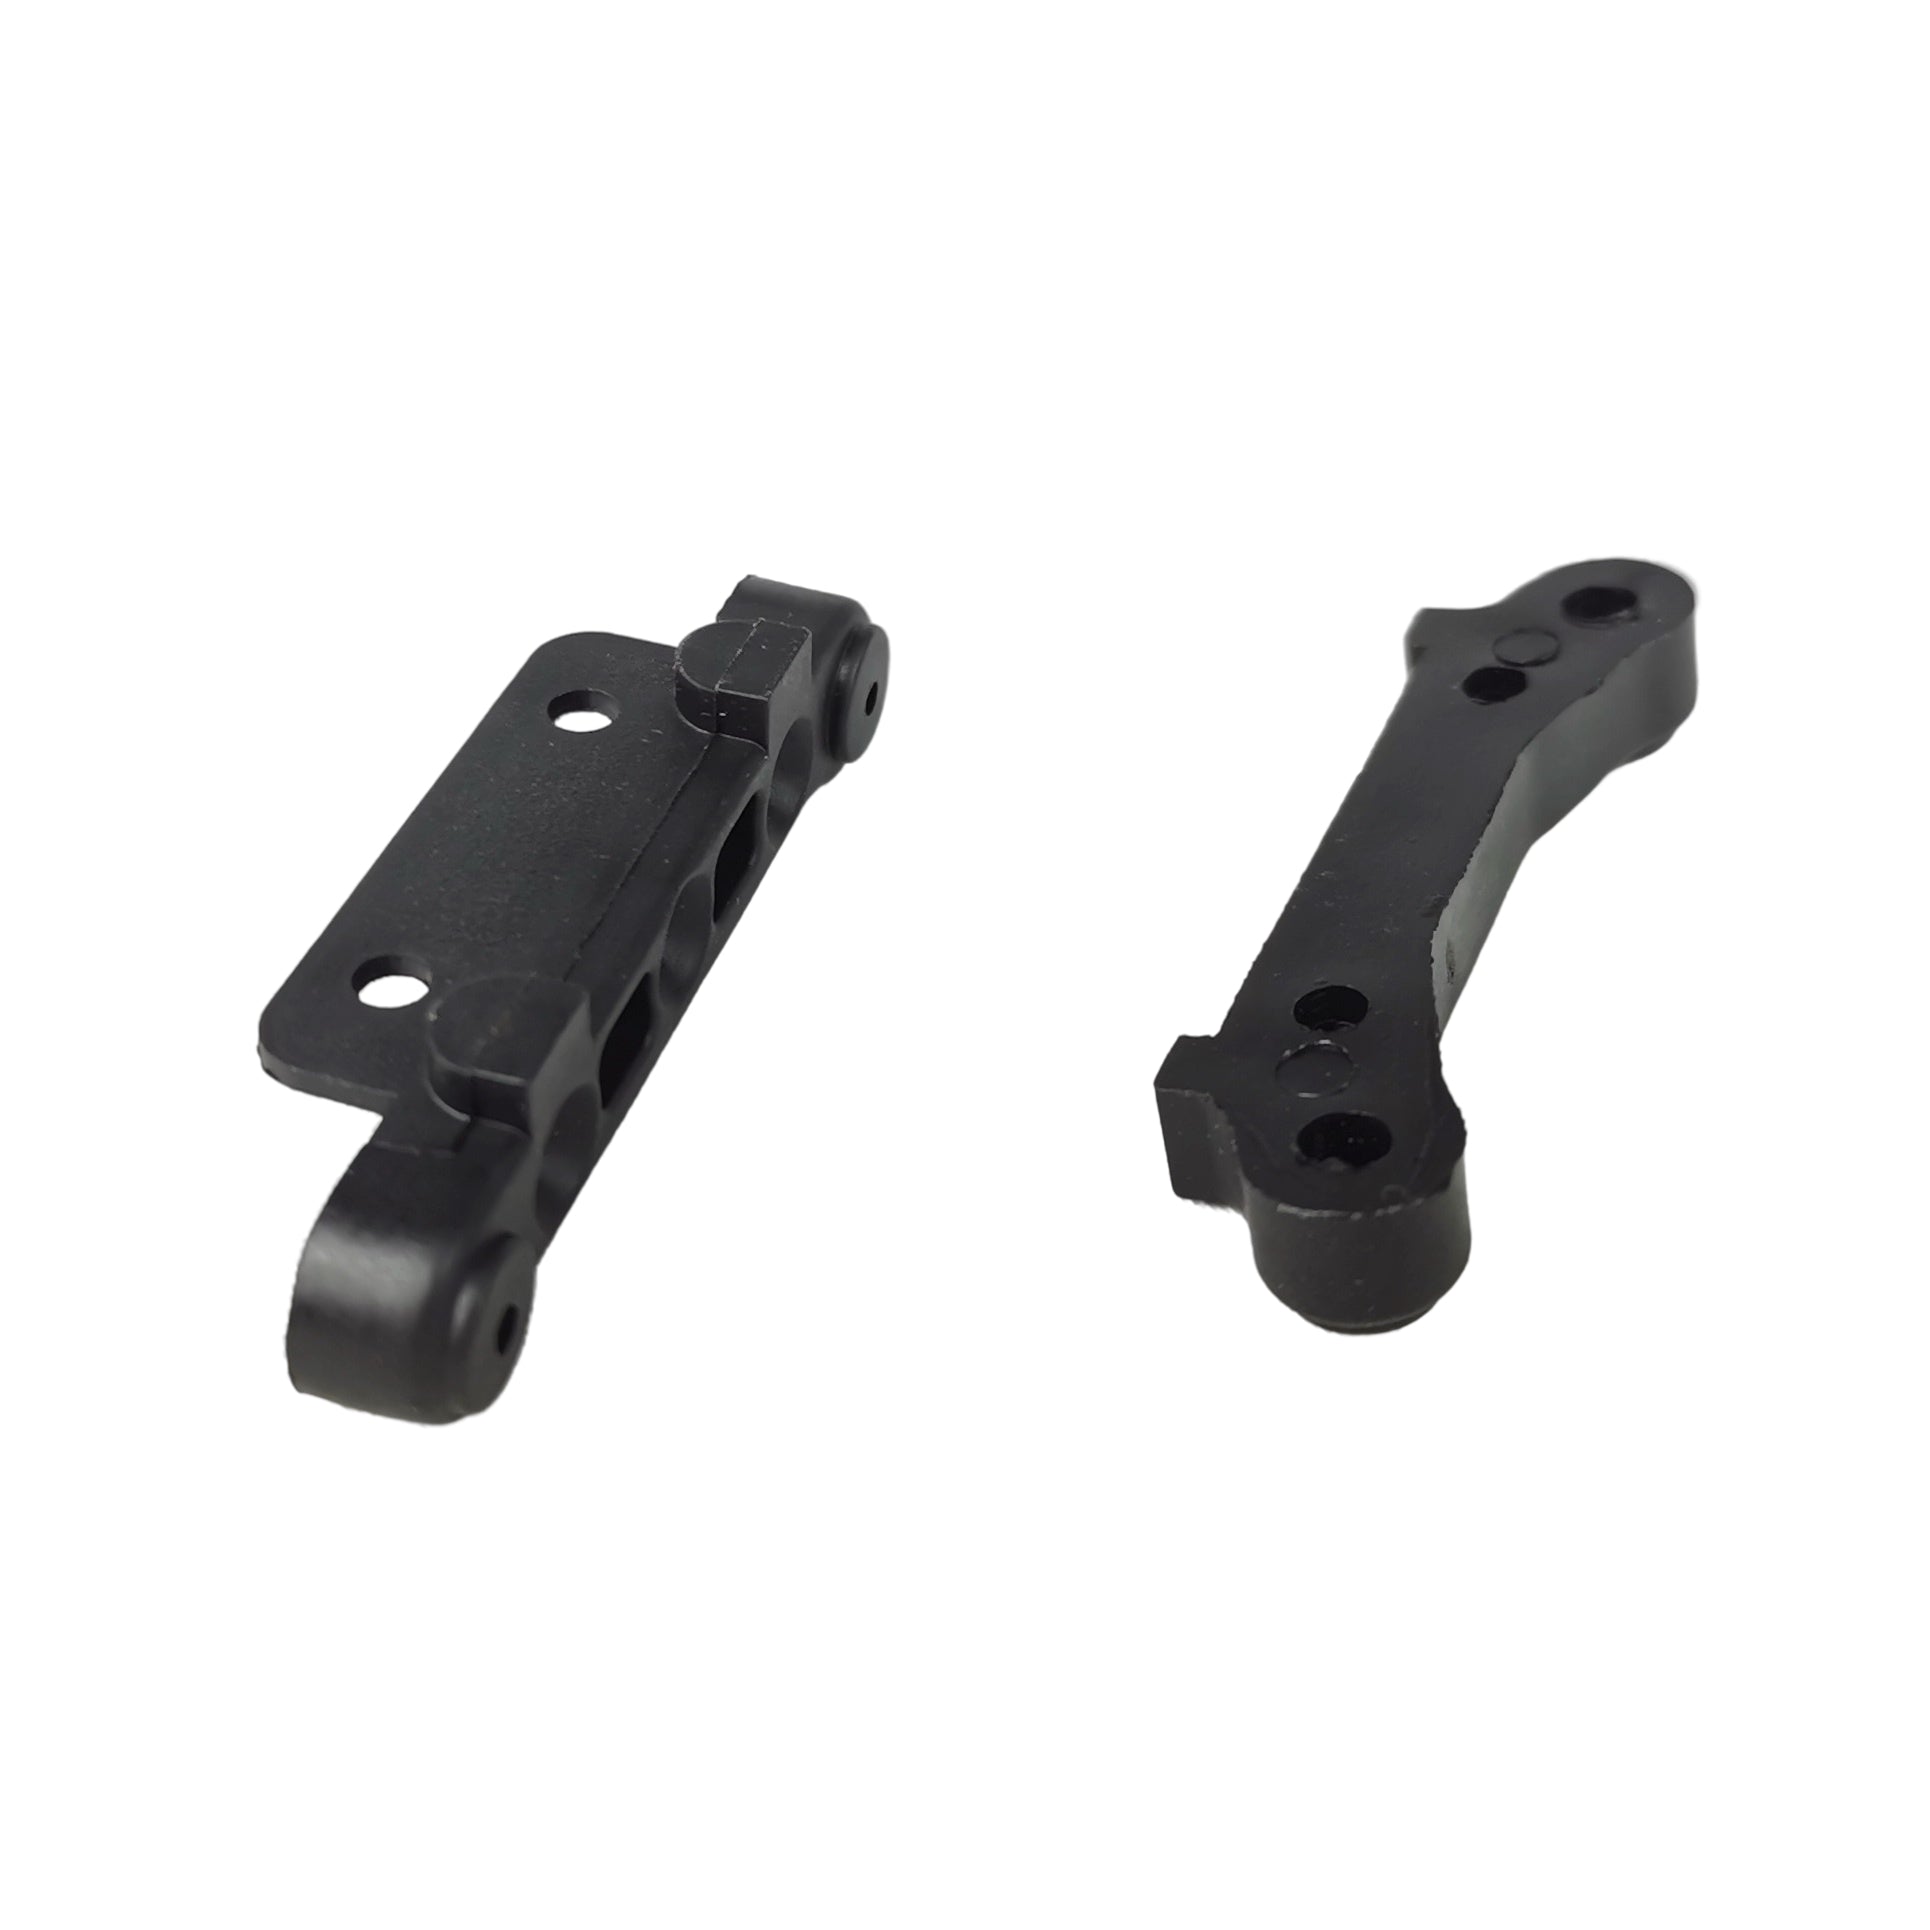 X Rear Suspension Holders - Part Number - TH-2011